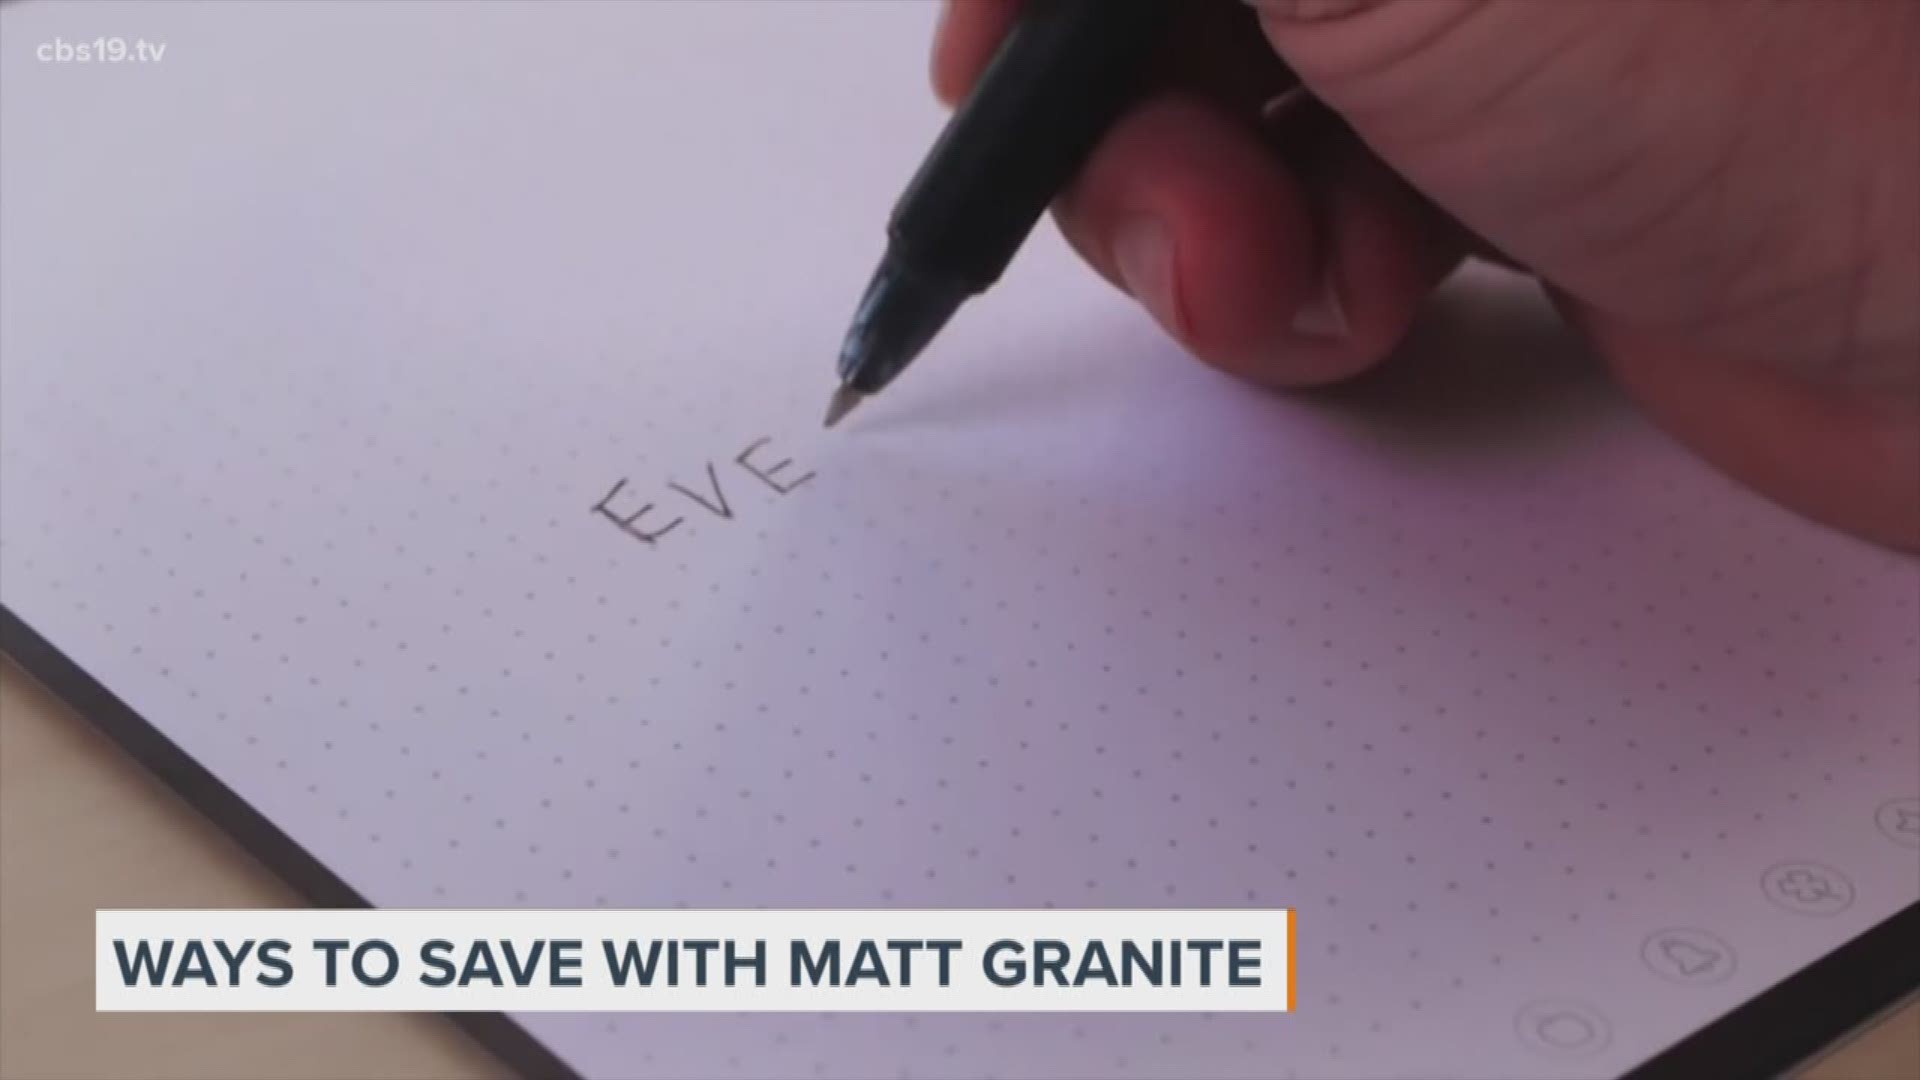 Ways to save: Smart notebook 